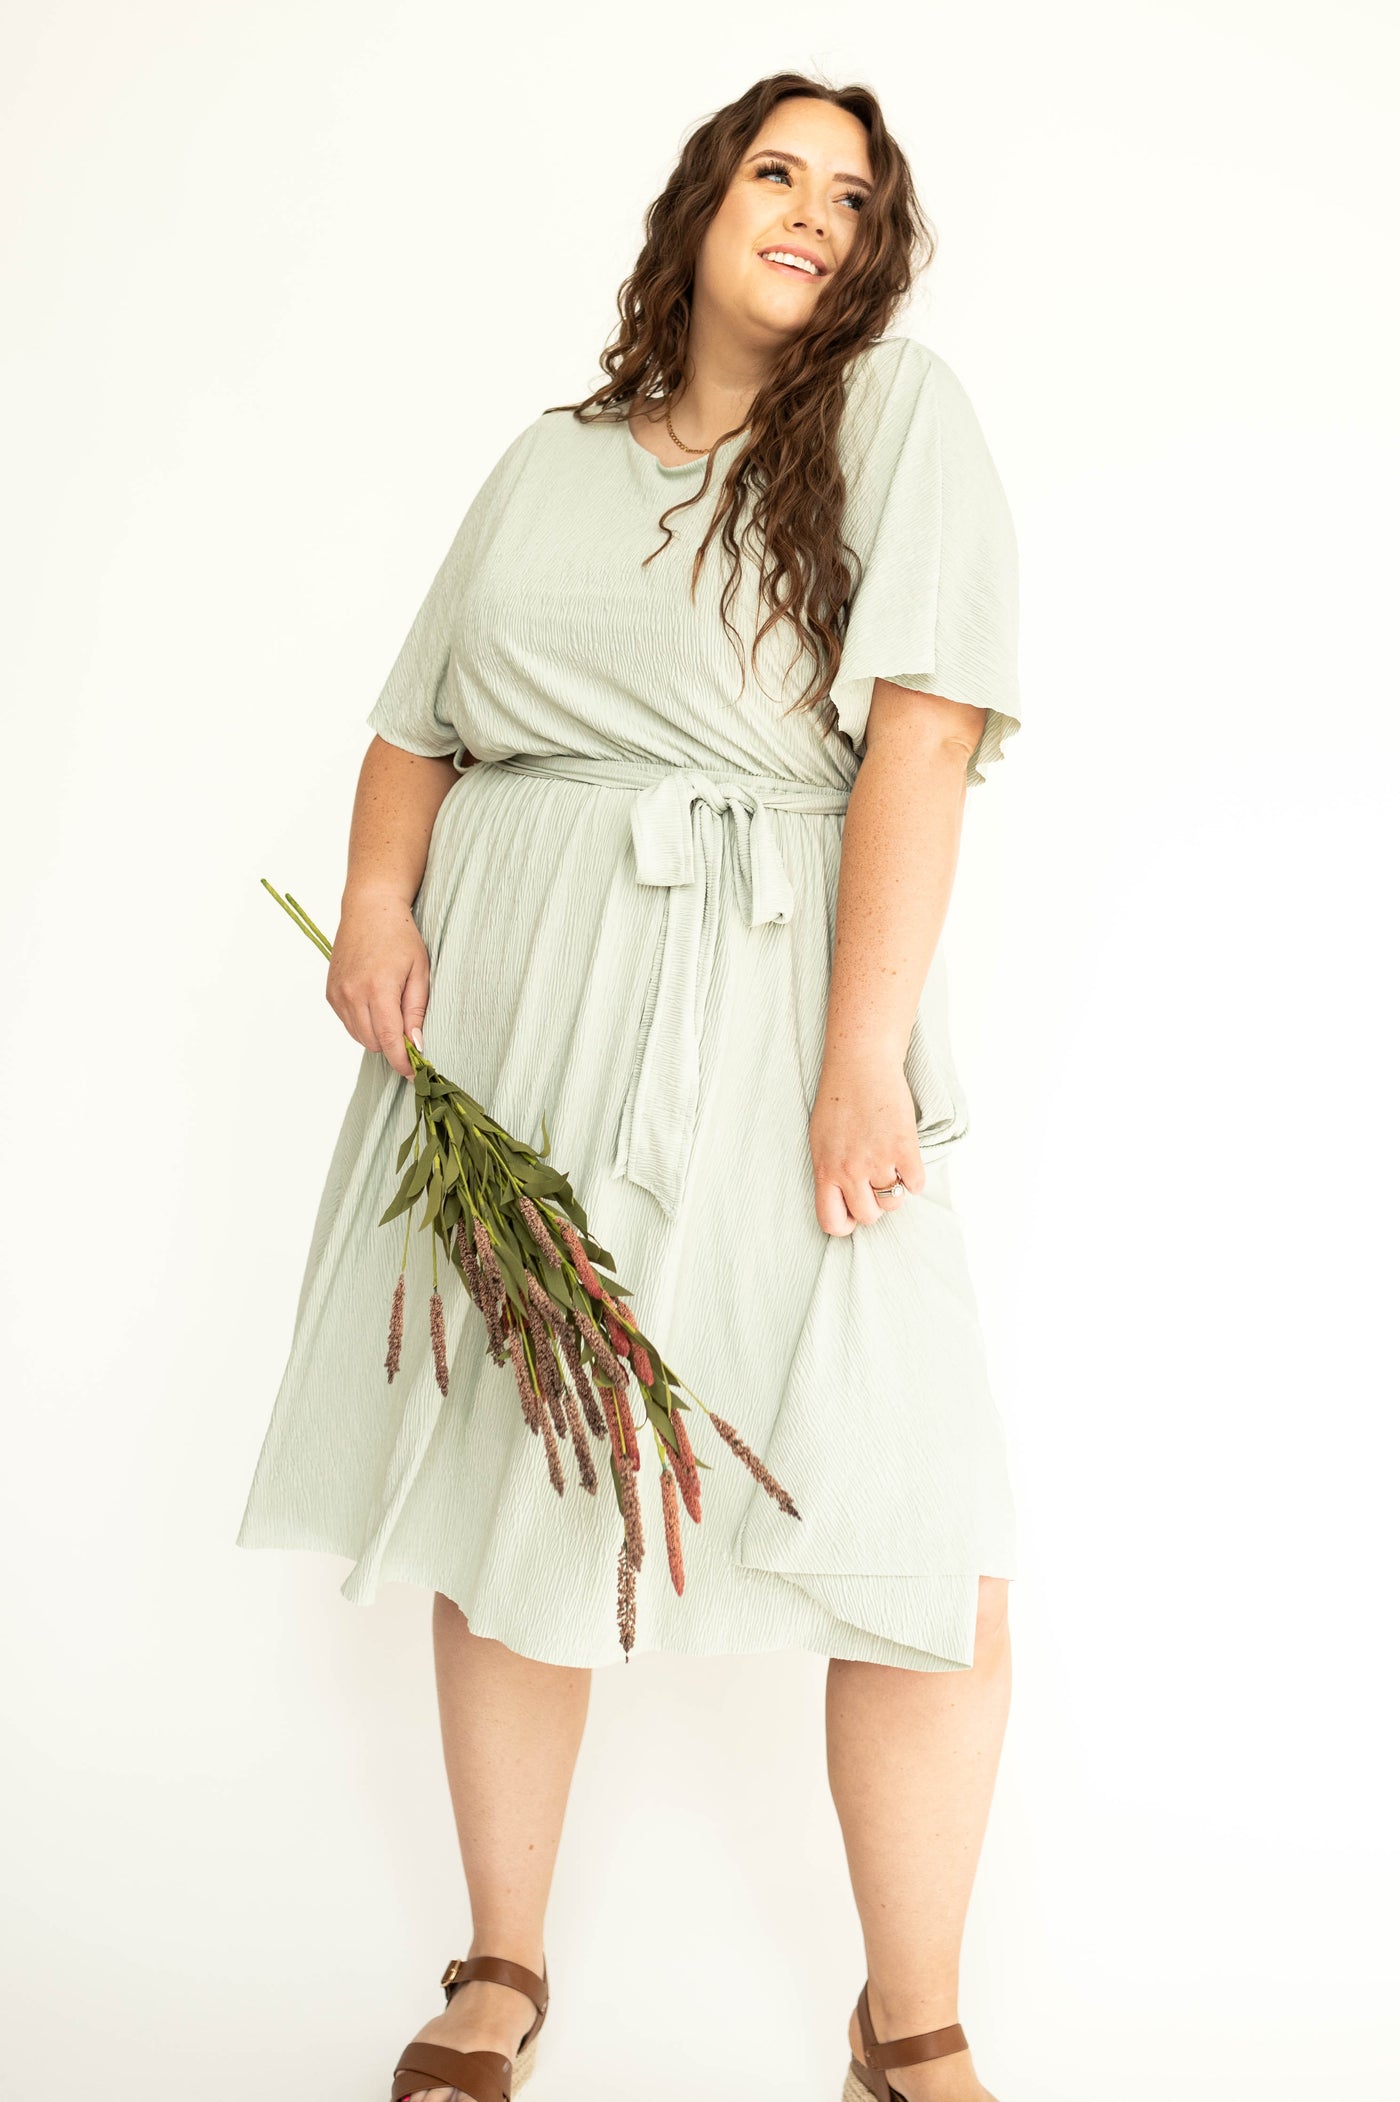 Plus size sage colored dress that ties at the waist